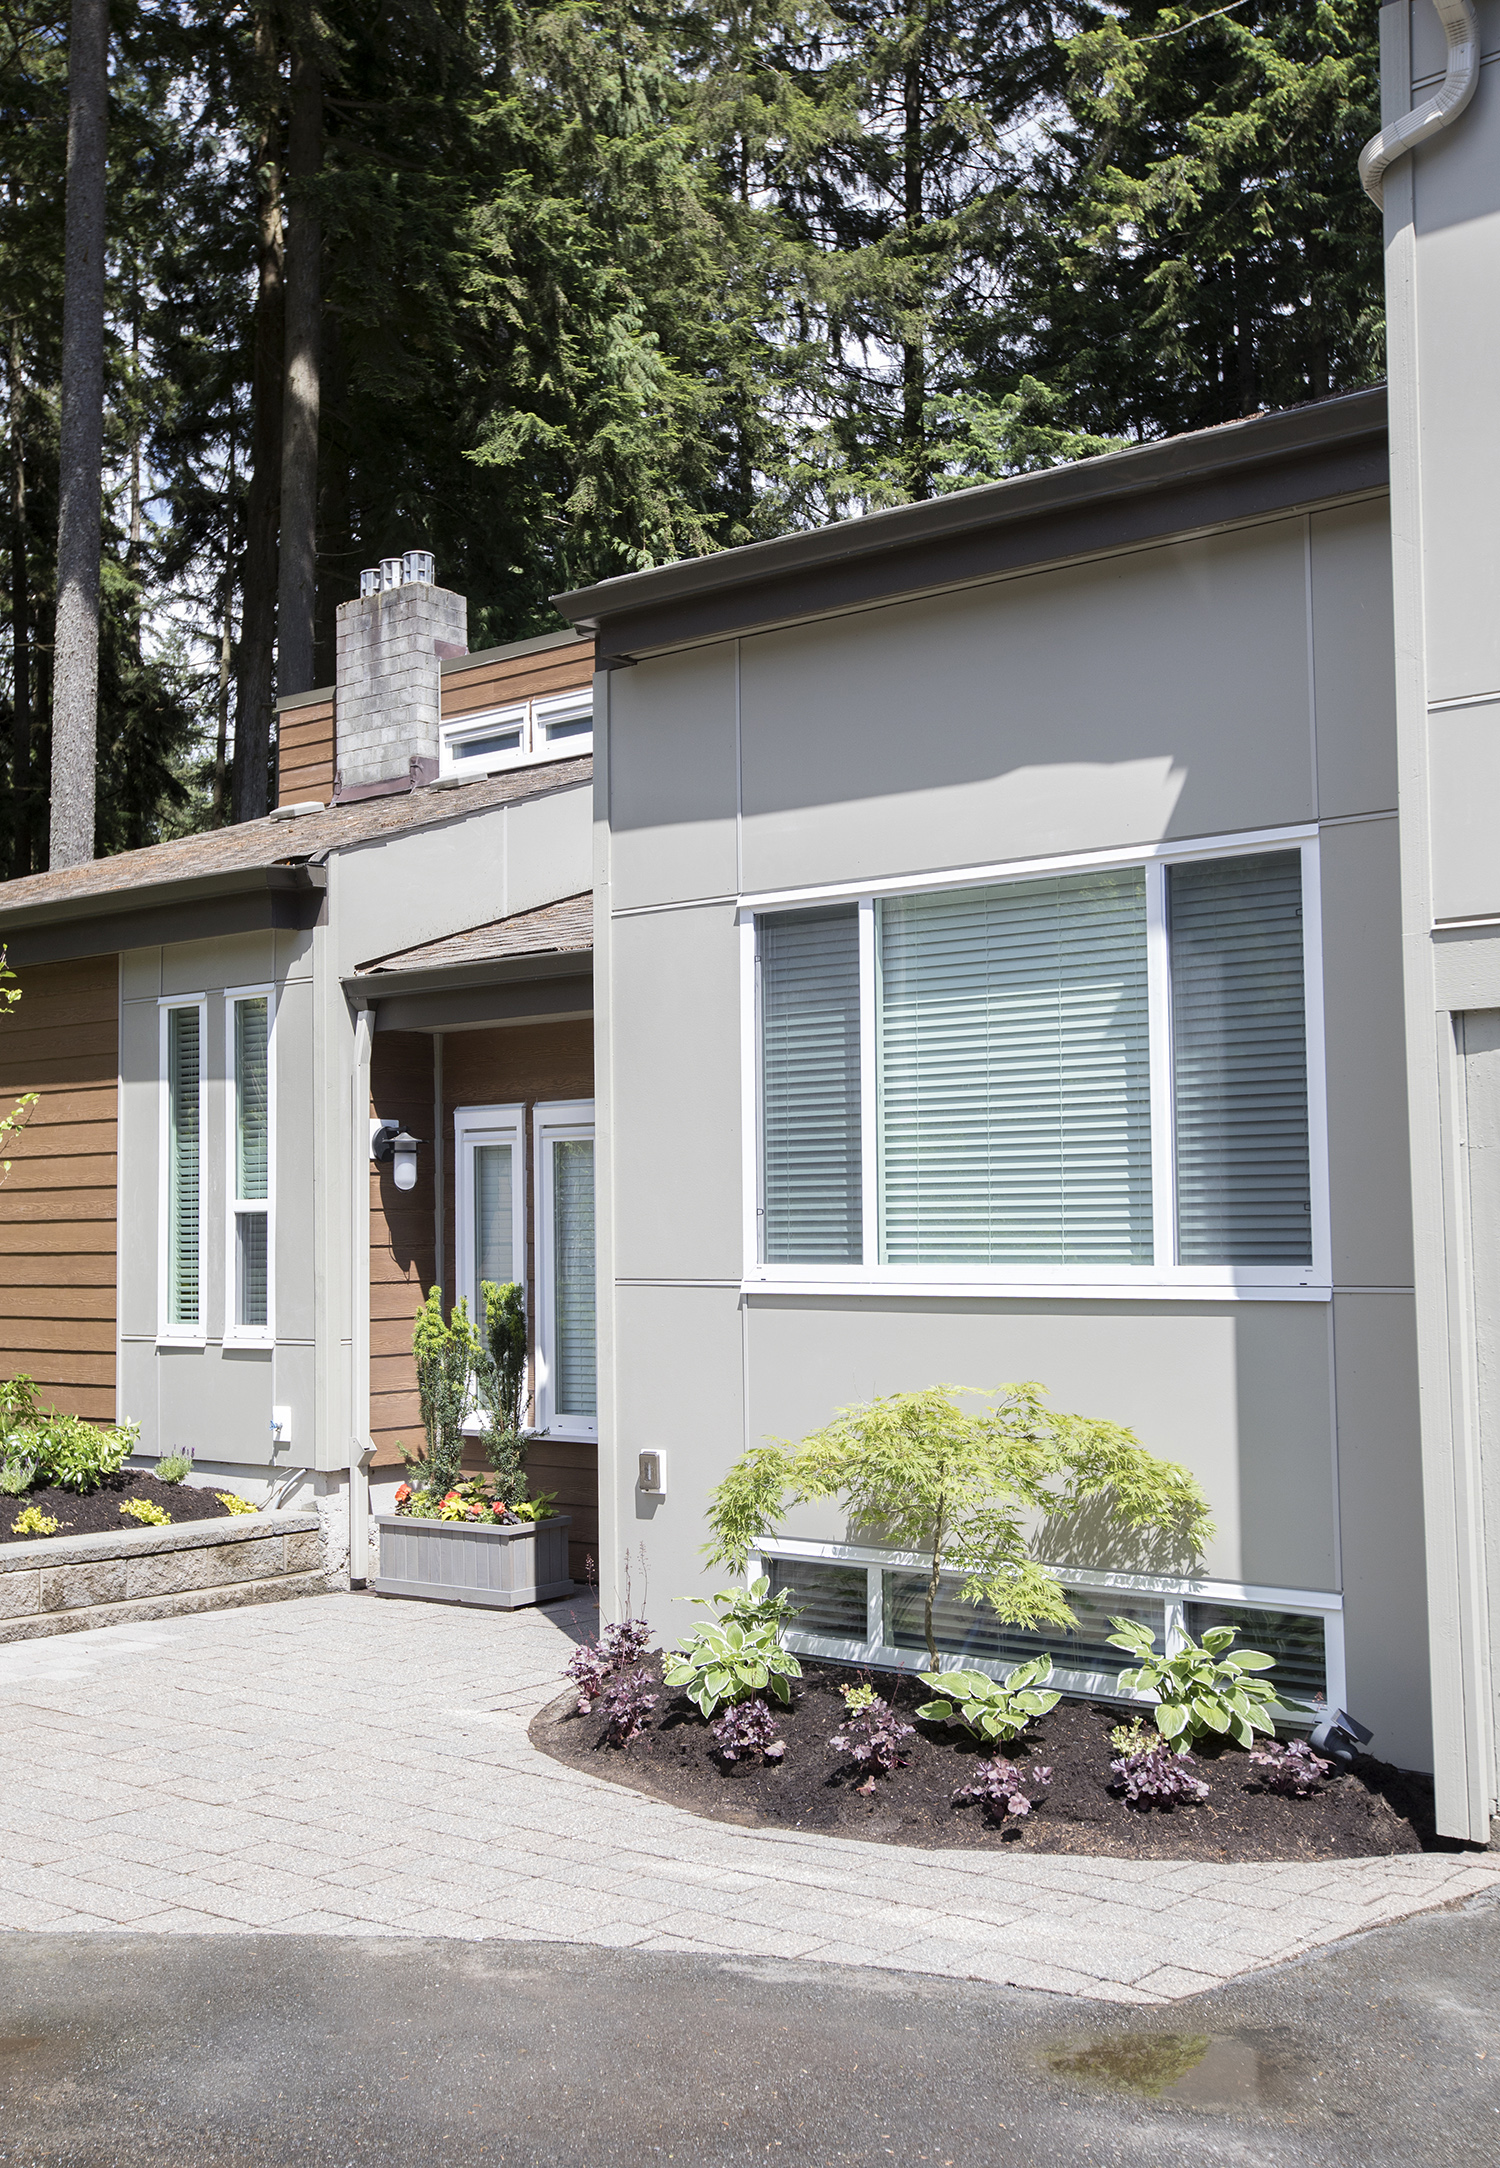 By using alternating flat-paneled and wood-grain siding on different “blocks” of this B.C. home, there is a strong textural change to the facade of this tree-ringed home, giving it a definitively modern vibe.